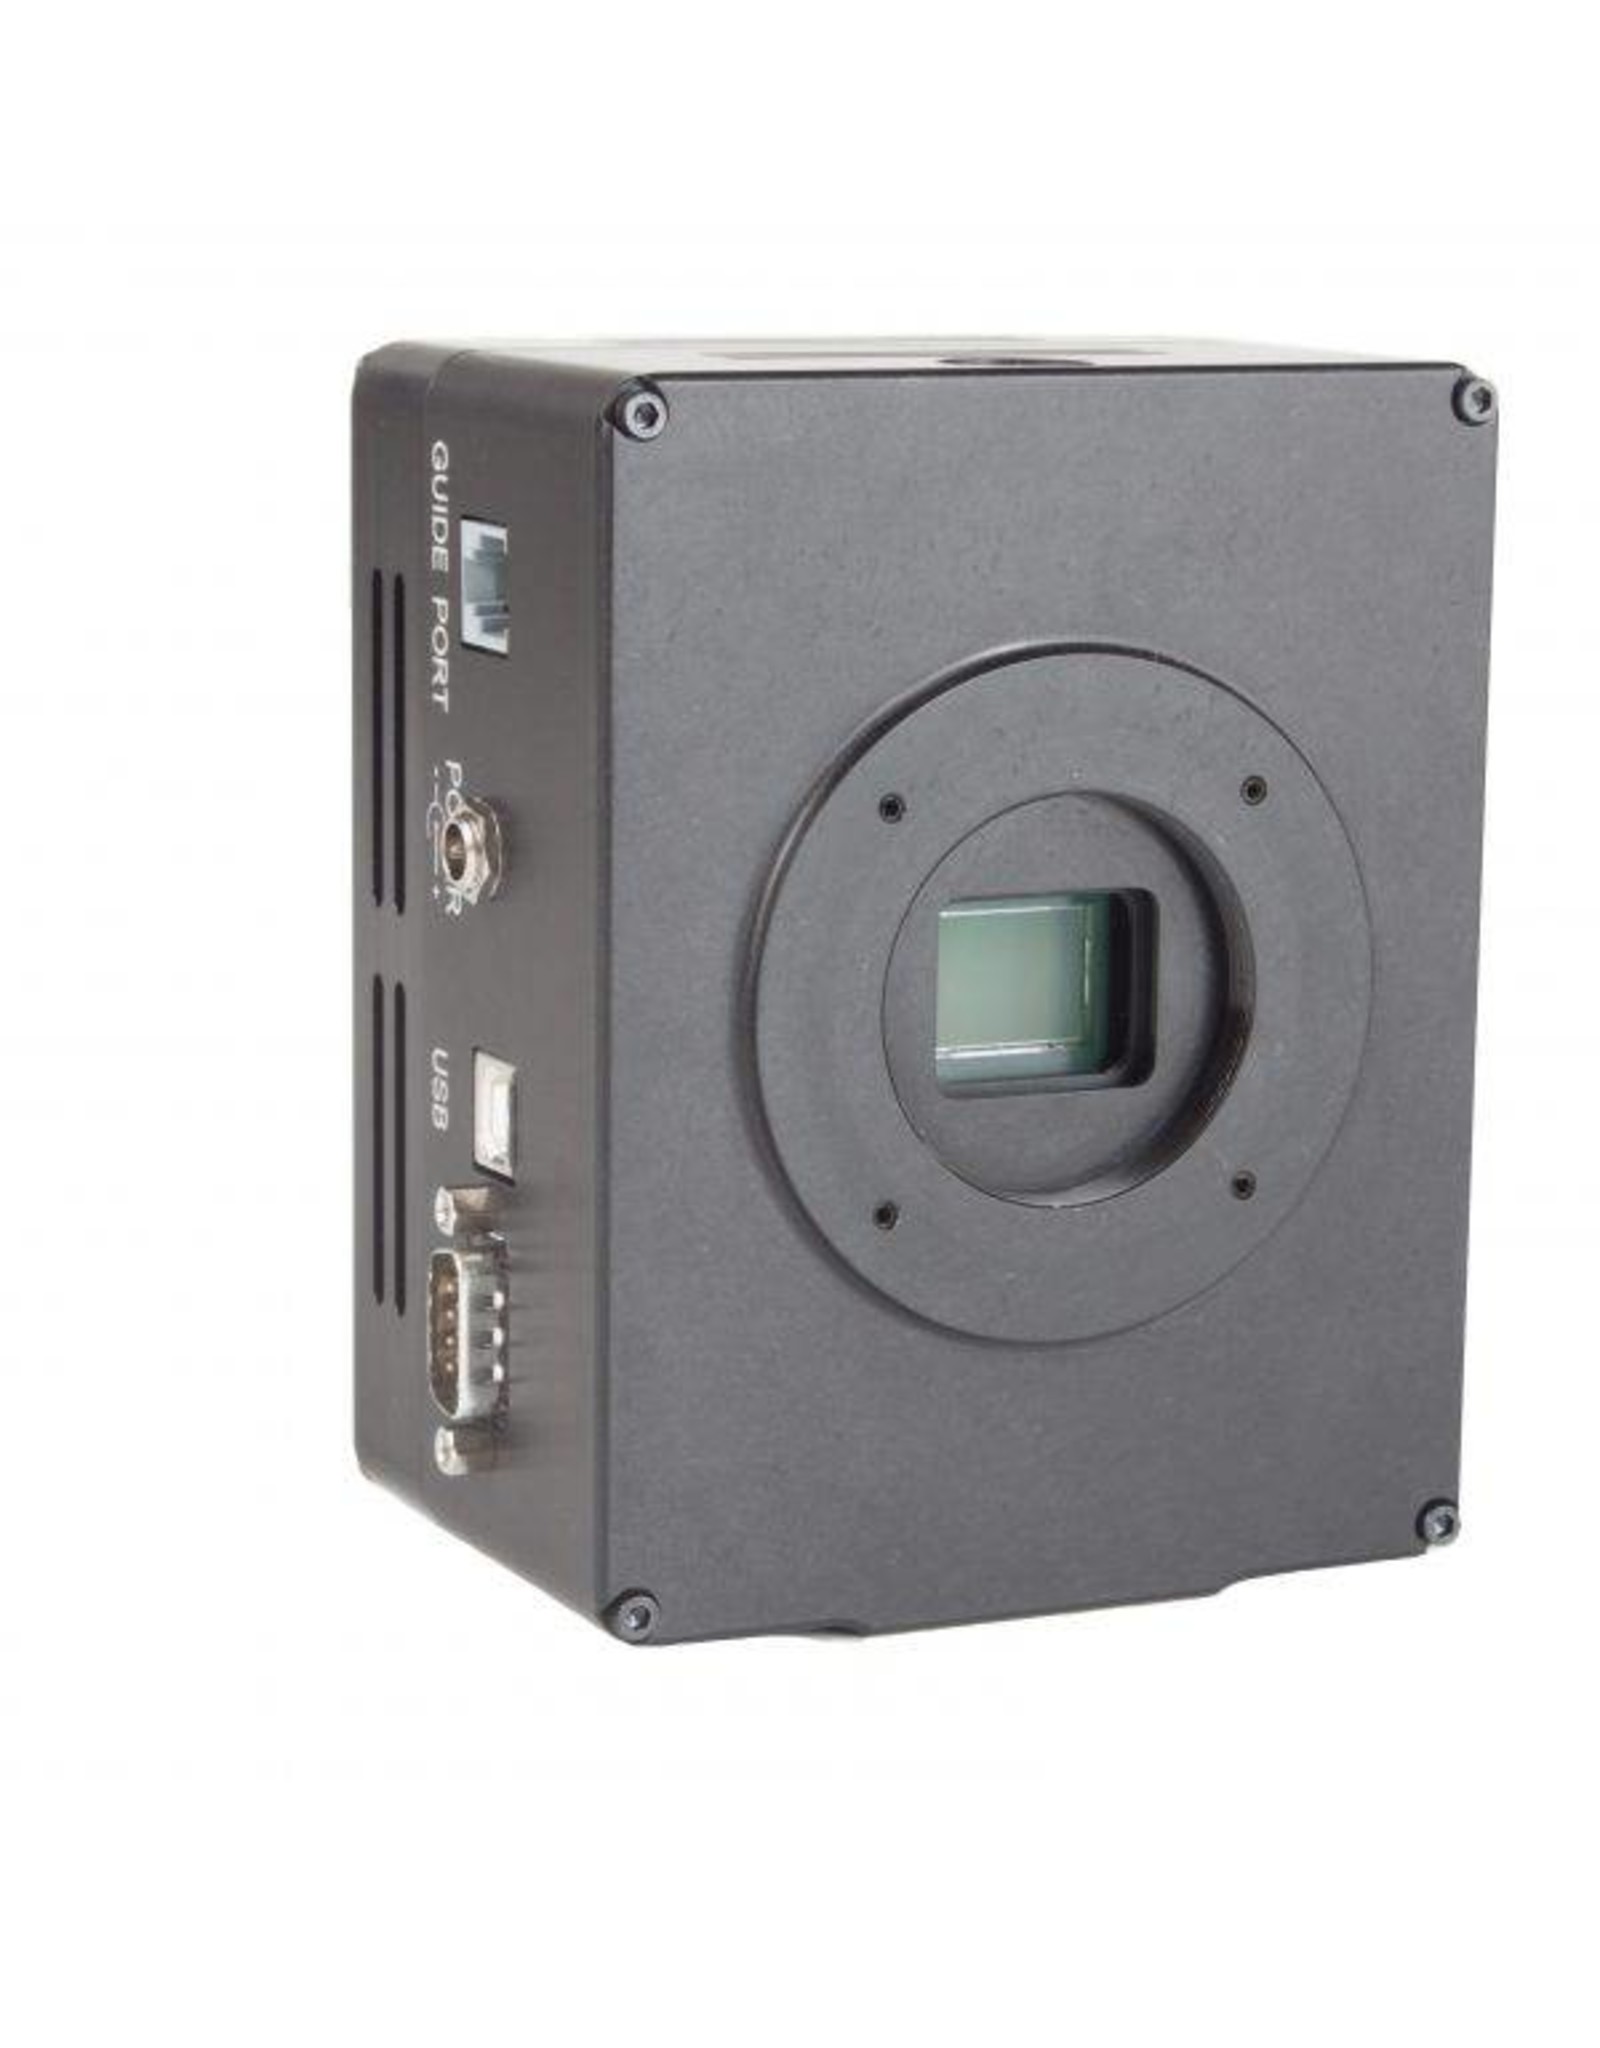 SBIG SBIG STF-4070SC (Truesense Sparse Color) Color Camera  (LIMITED AVAILABILITY)